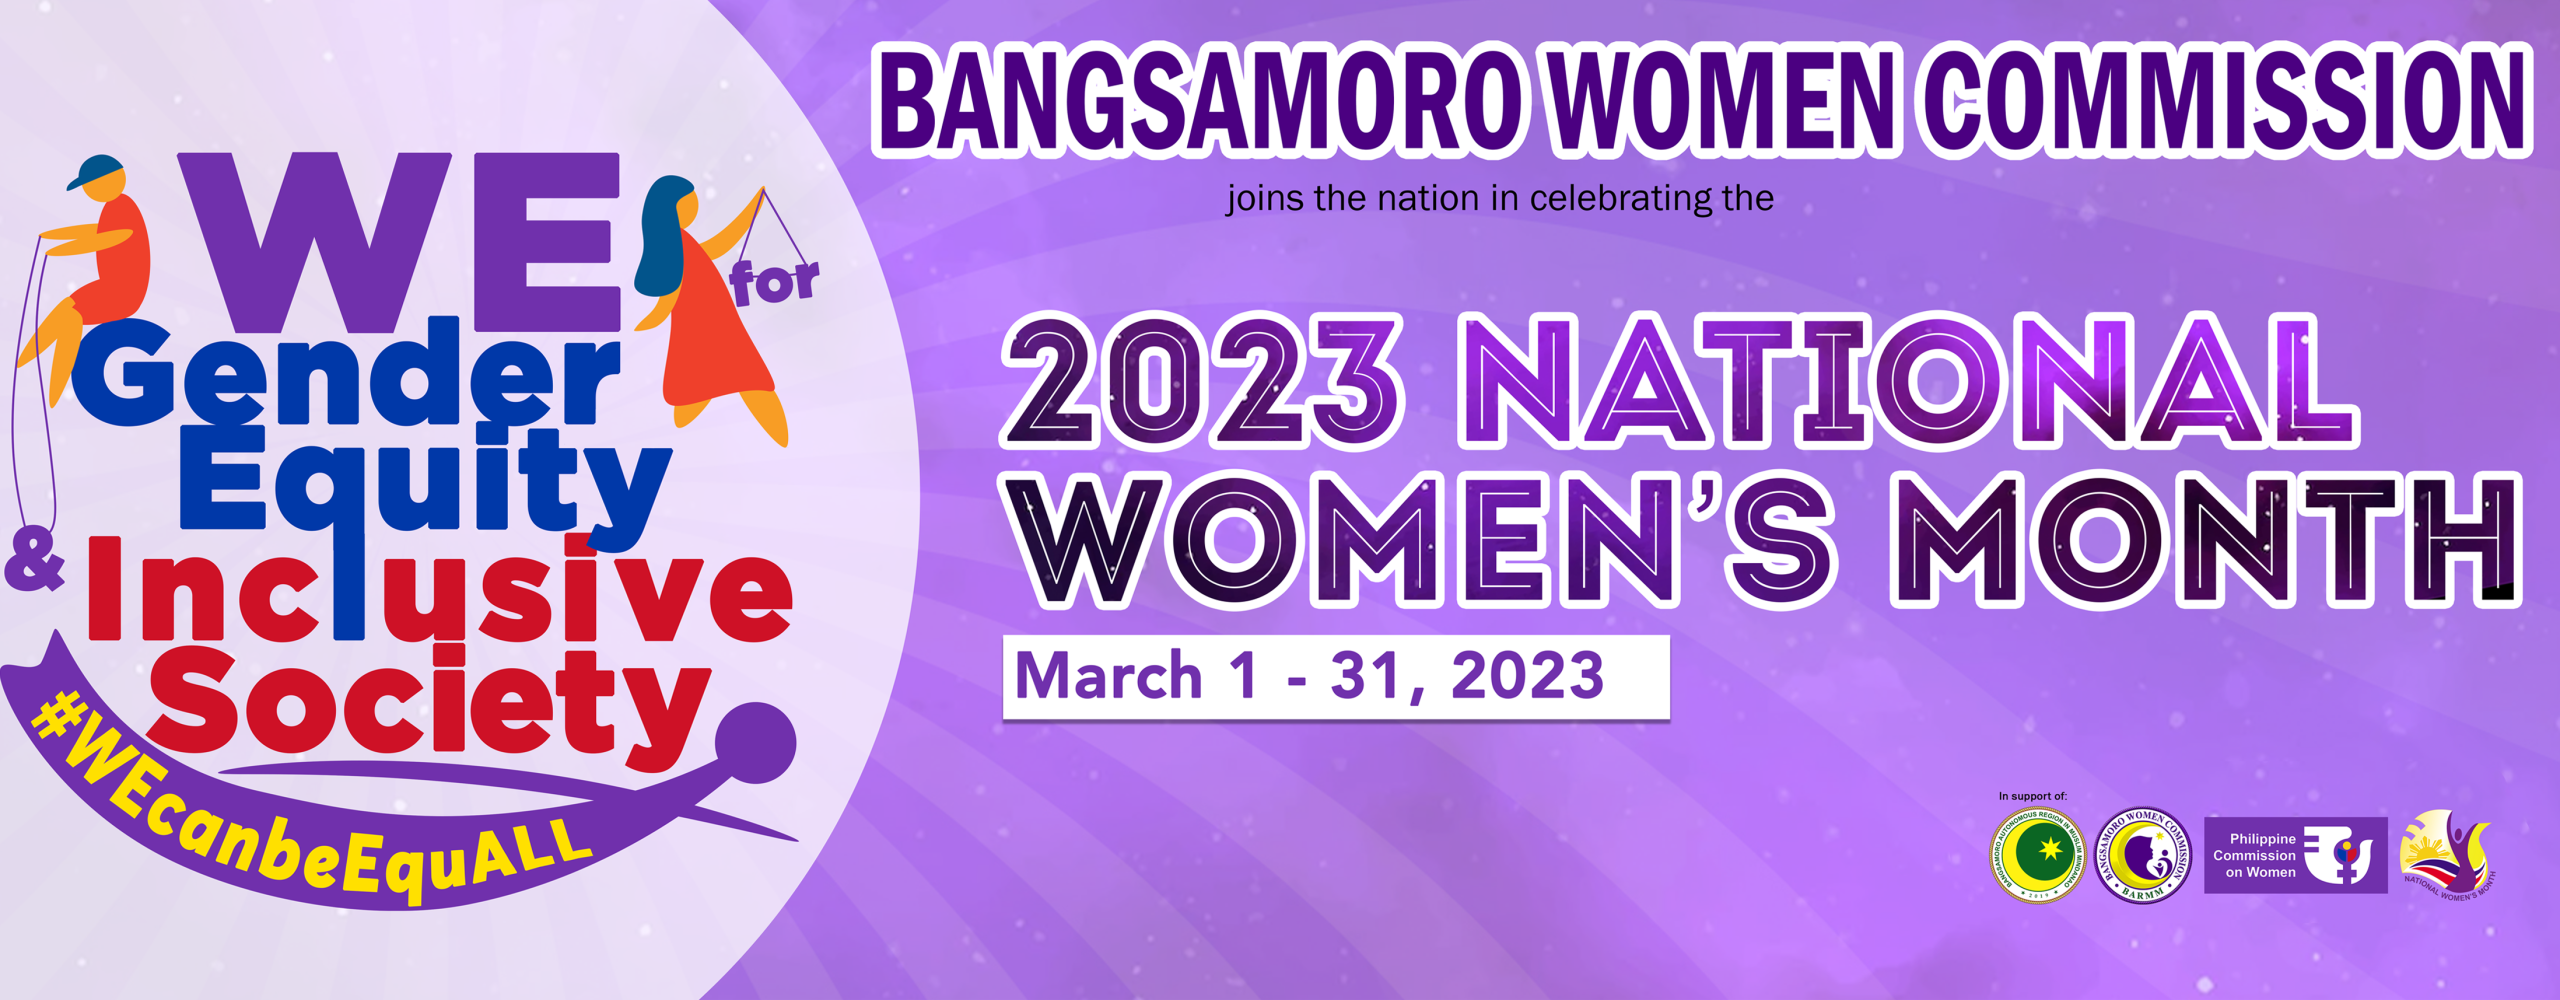 2023 NATIONAL WOMENS MONTH